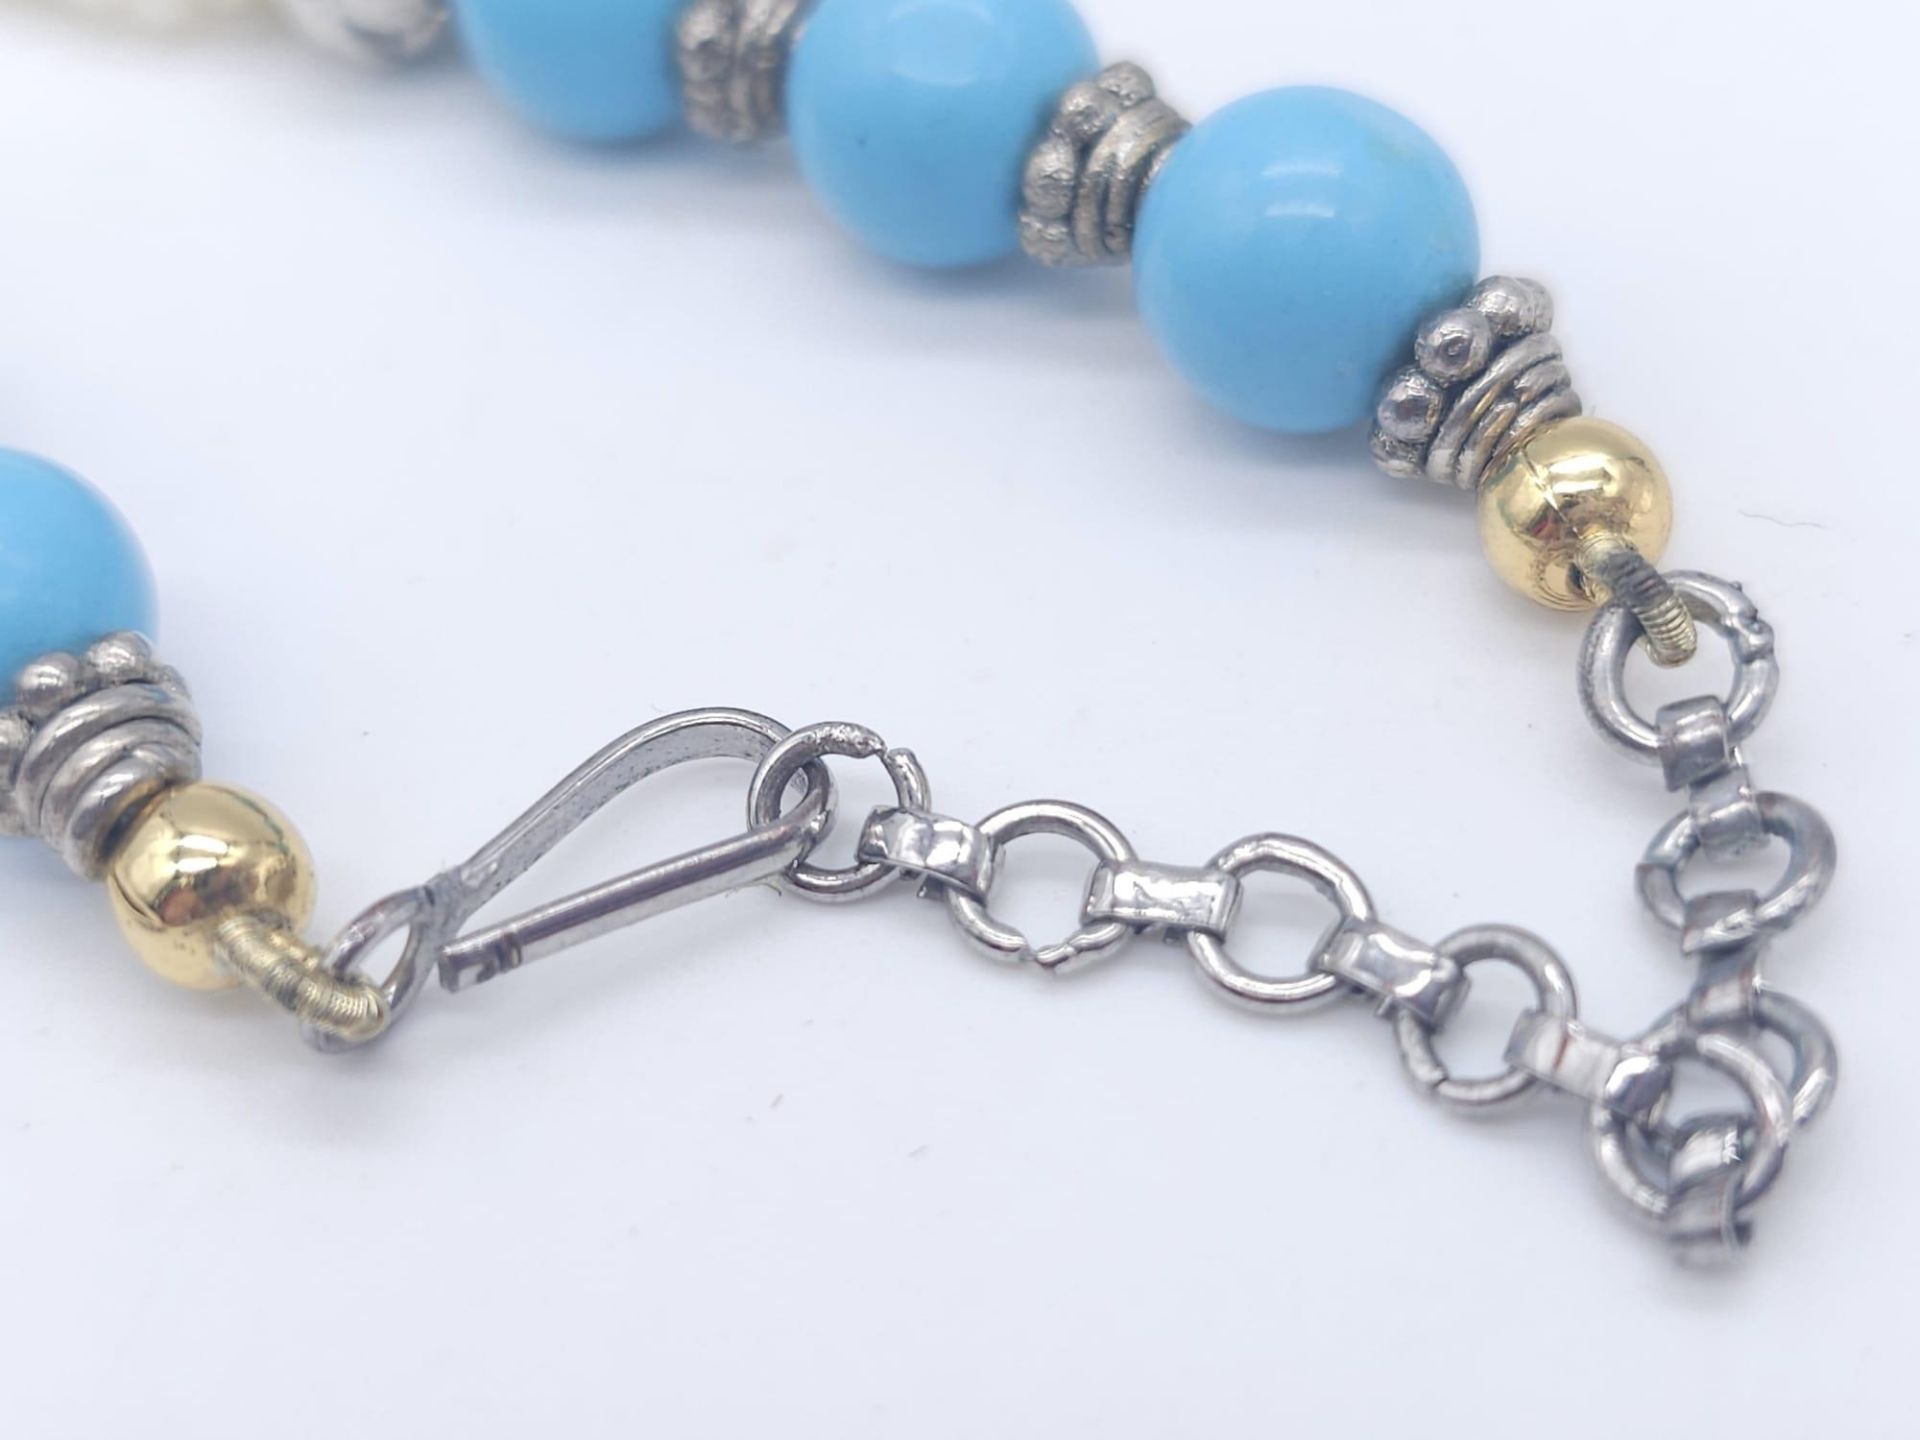 A Vintage Chalcedony and Four Strand Seed Pearl Necklace. With an art deco style drop pendant. - Image 7 of 7